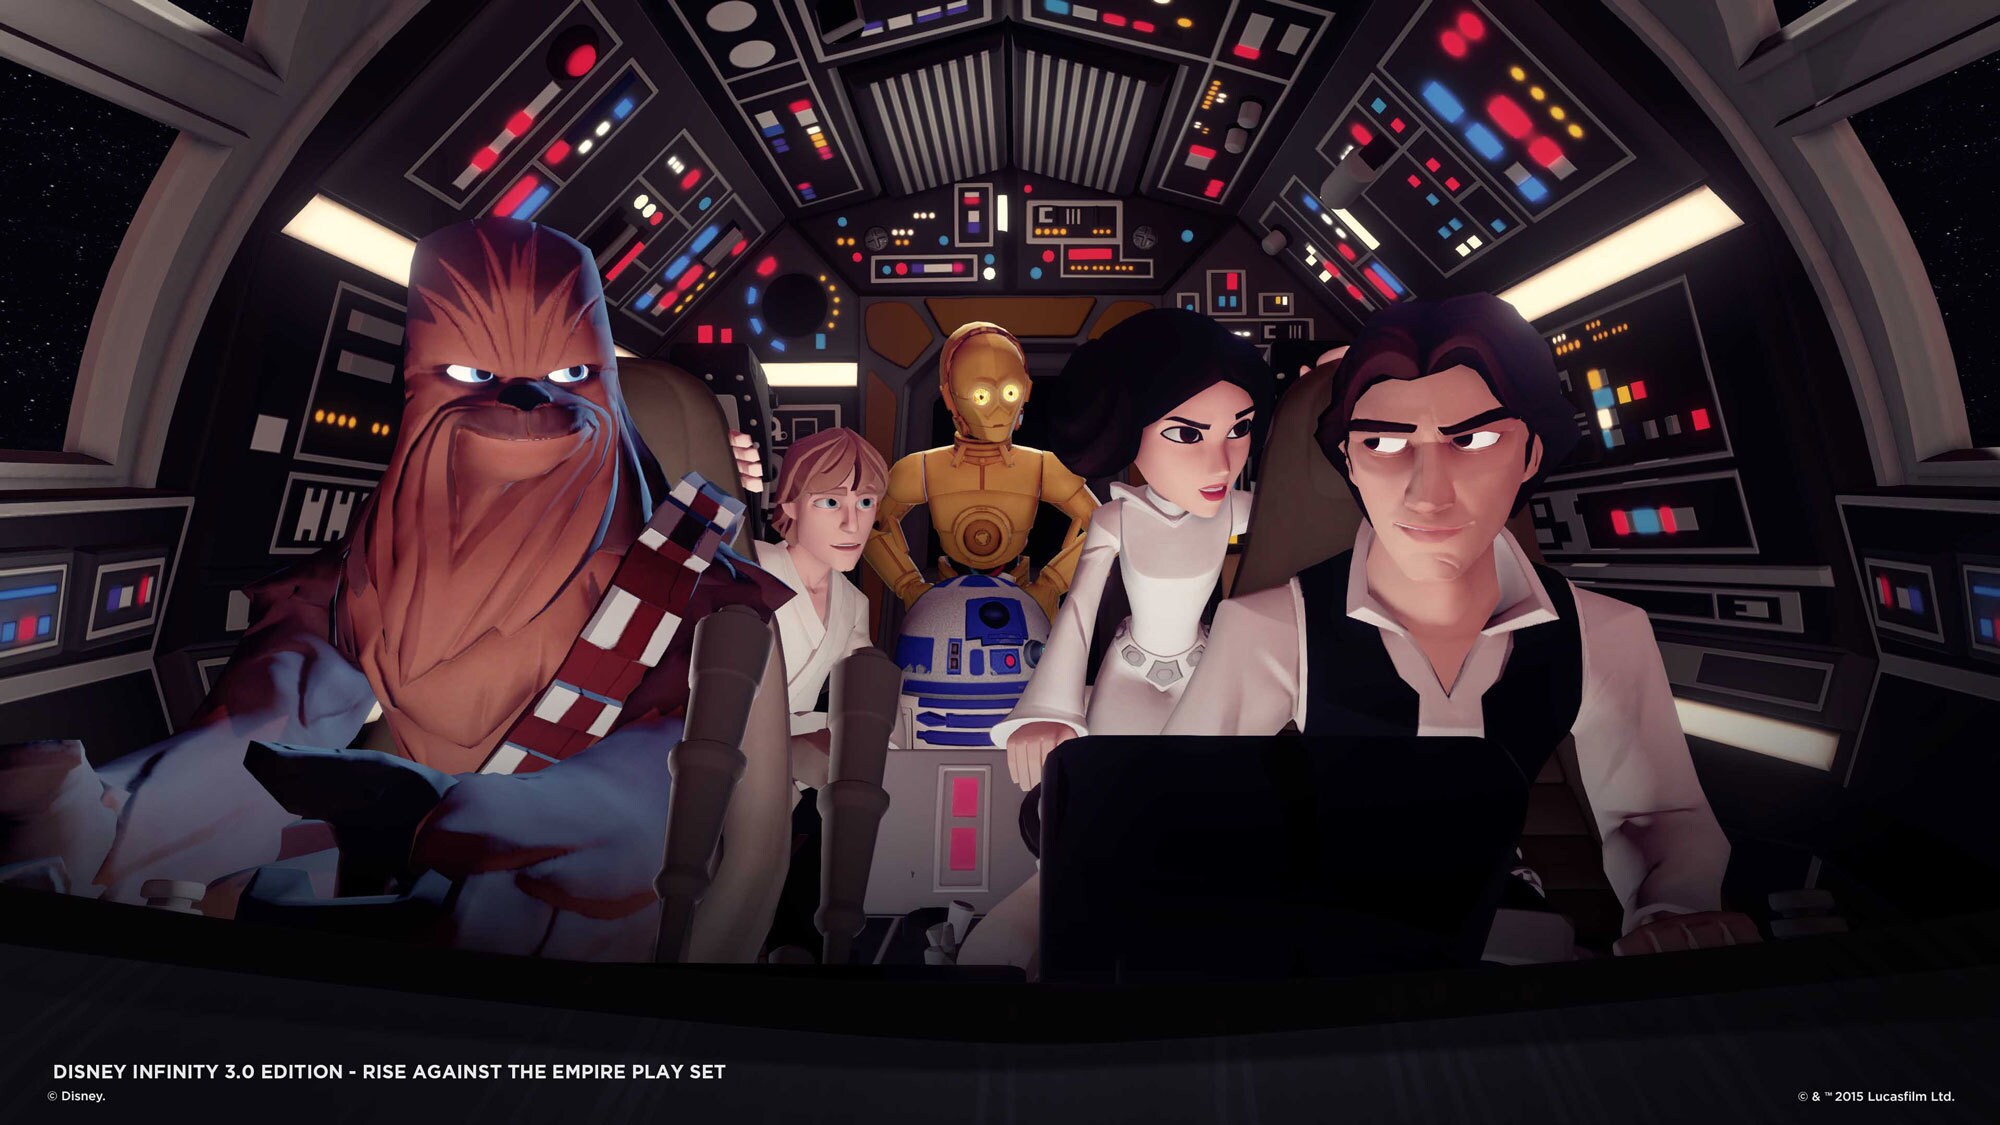 6 Things You Don't Know About Disney Infinity 3.0 Edition's Rise Against the Empire Play Set